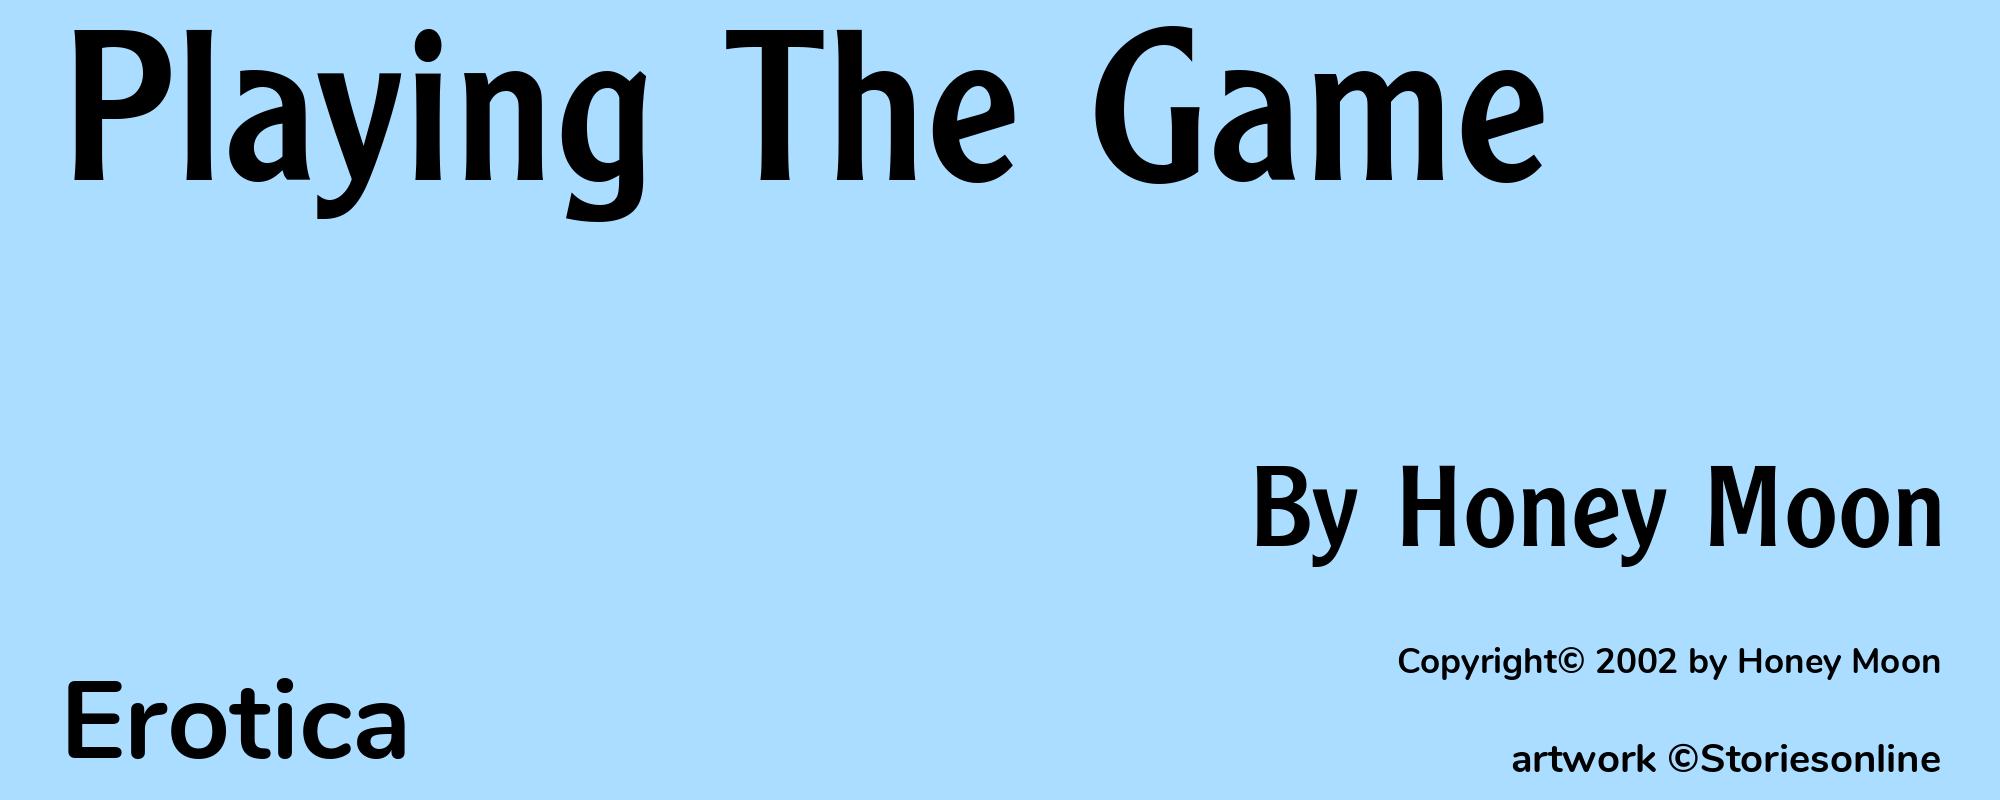 Playing The Game - Cover